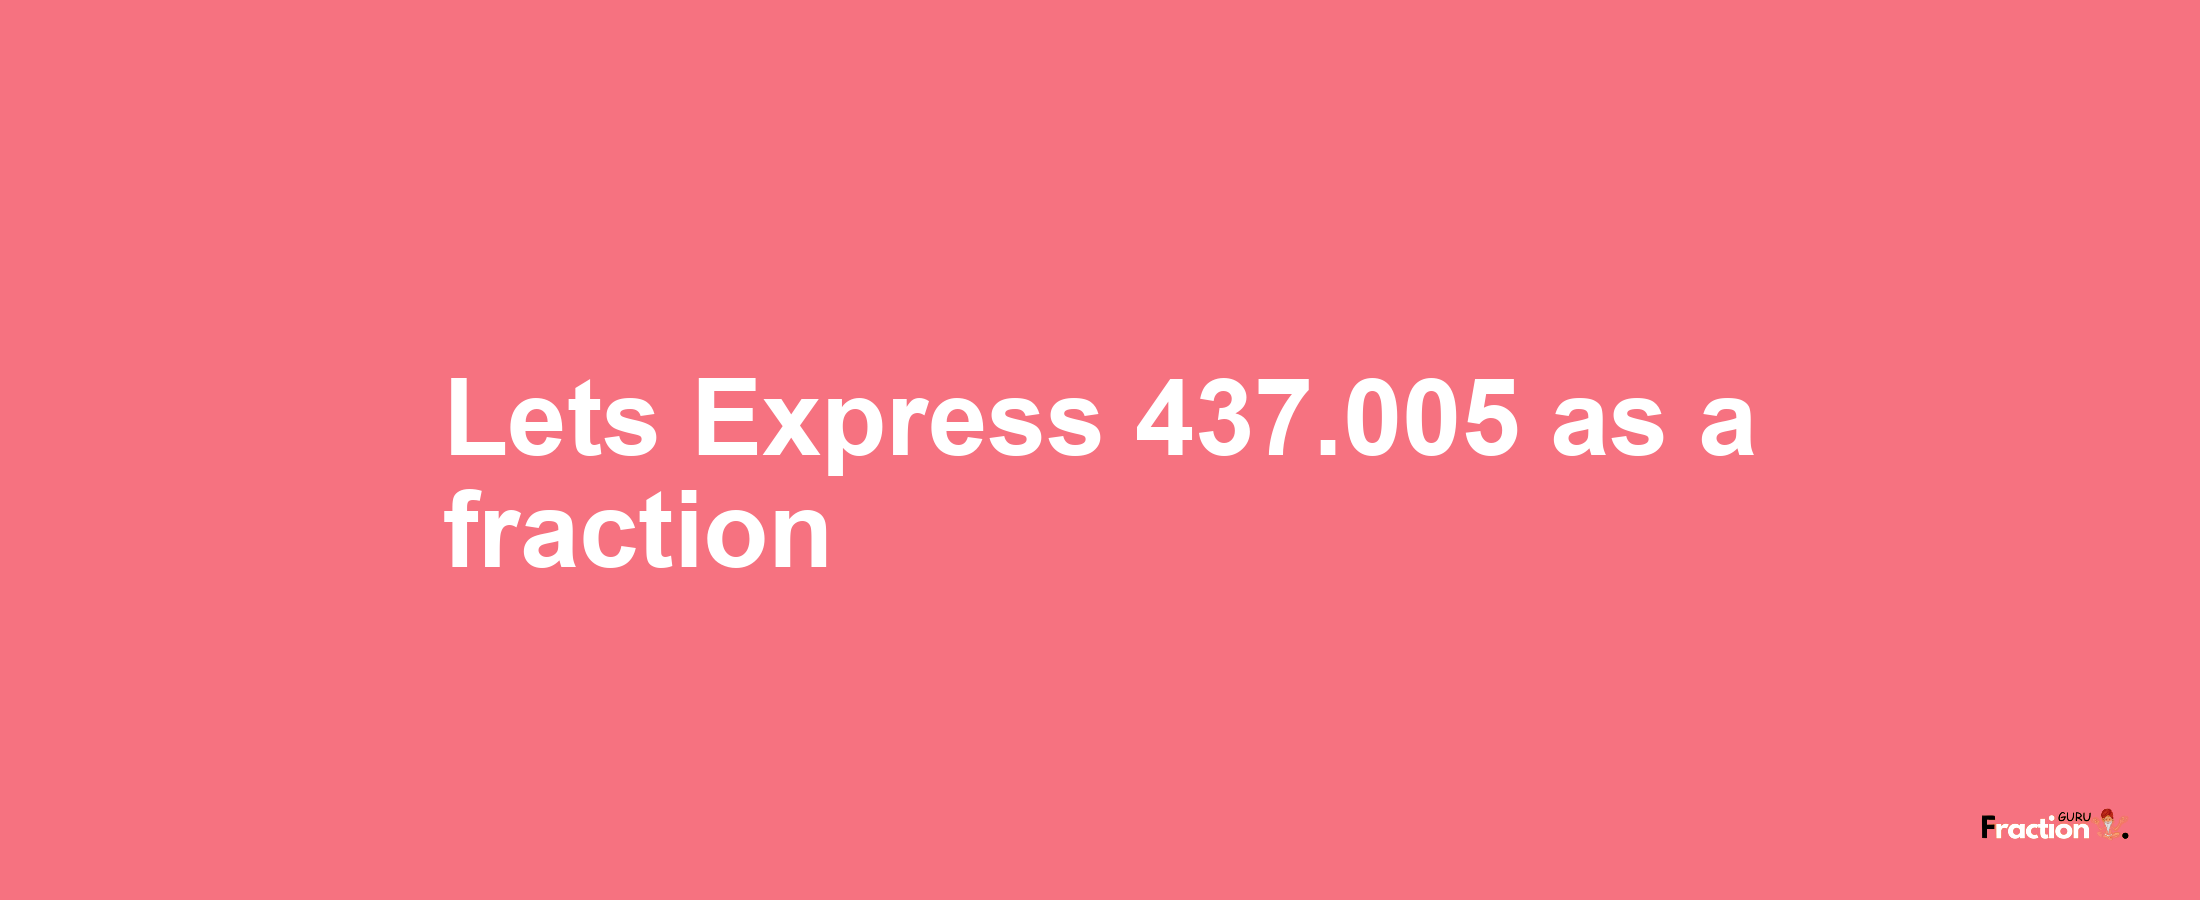 Lets Express 437.005 as afraction